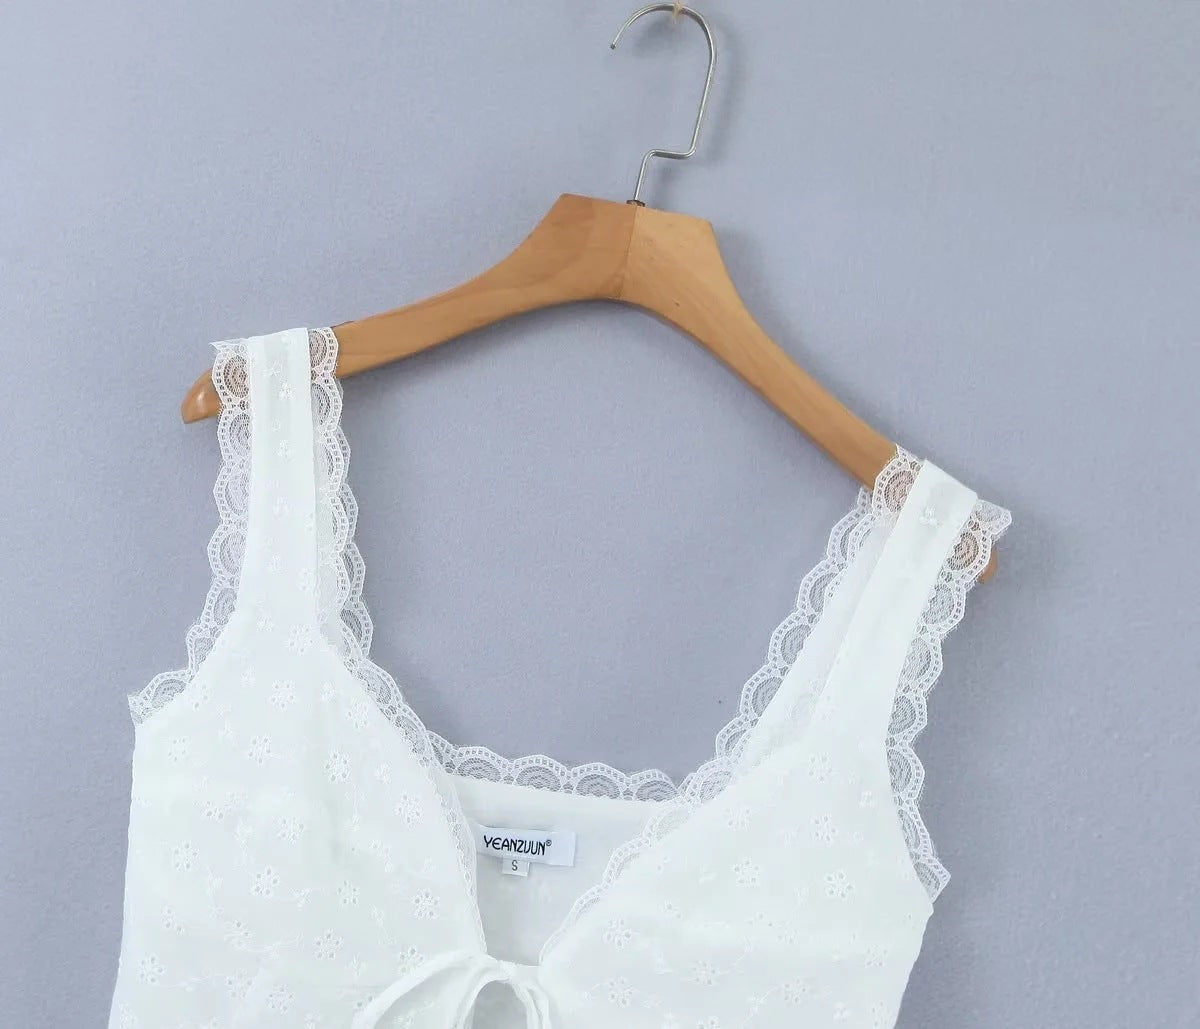 Understated White Tied Top